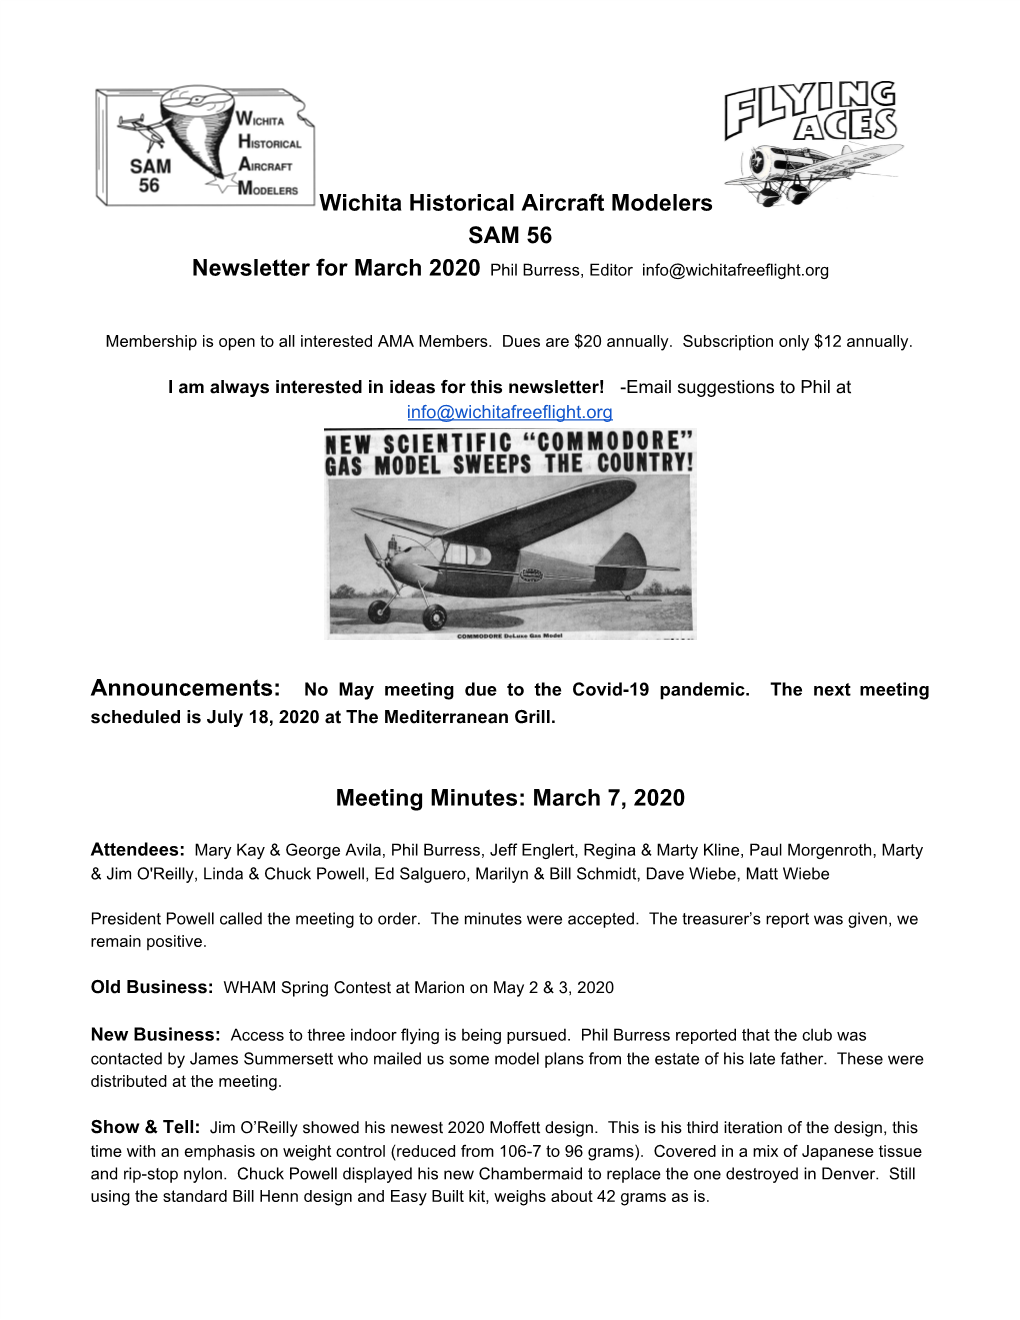 Wichita Historical Aircraft Modelers SAM 56 Meeting Minutes: March 7